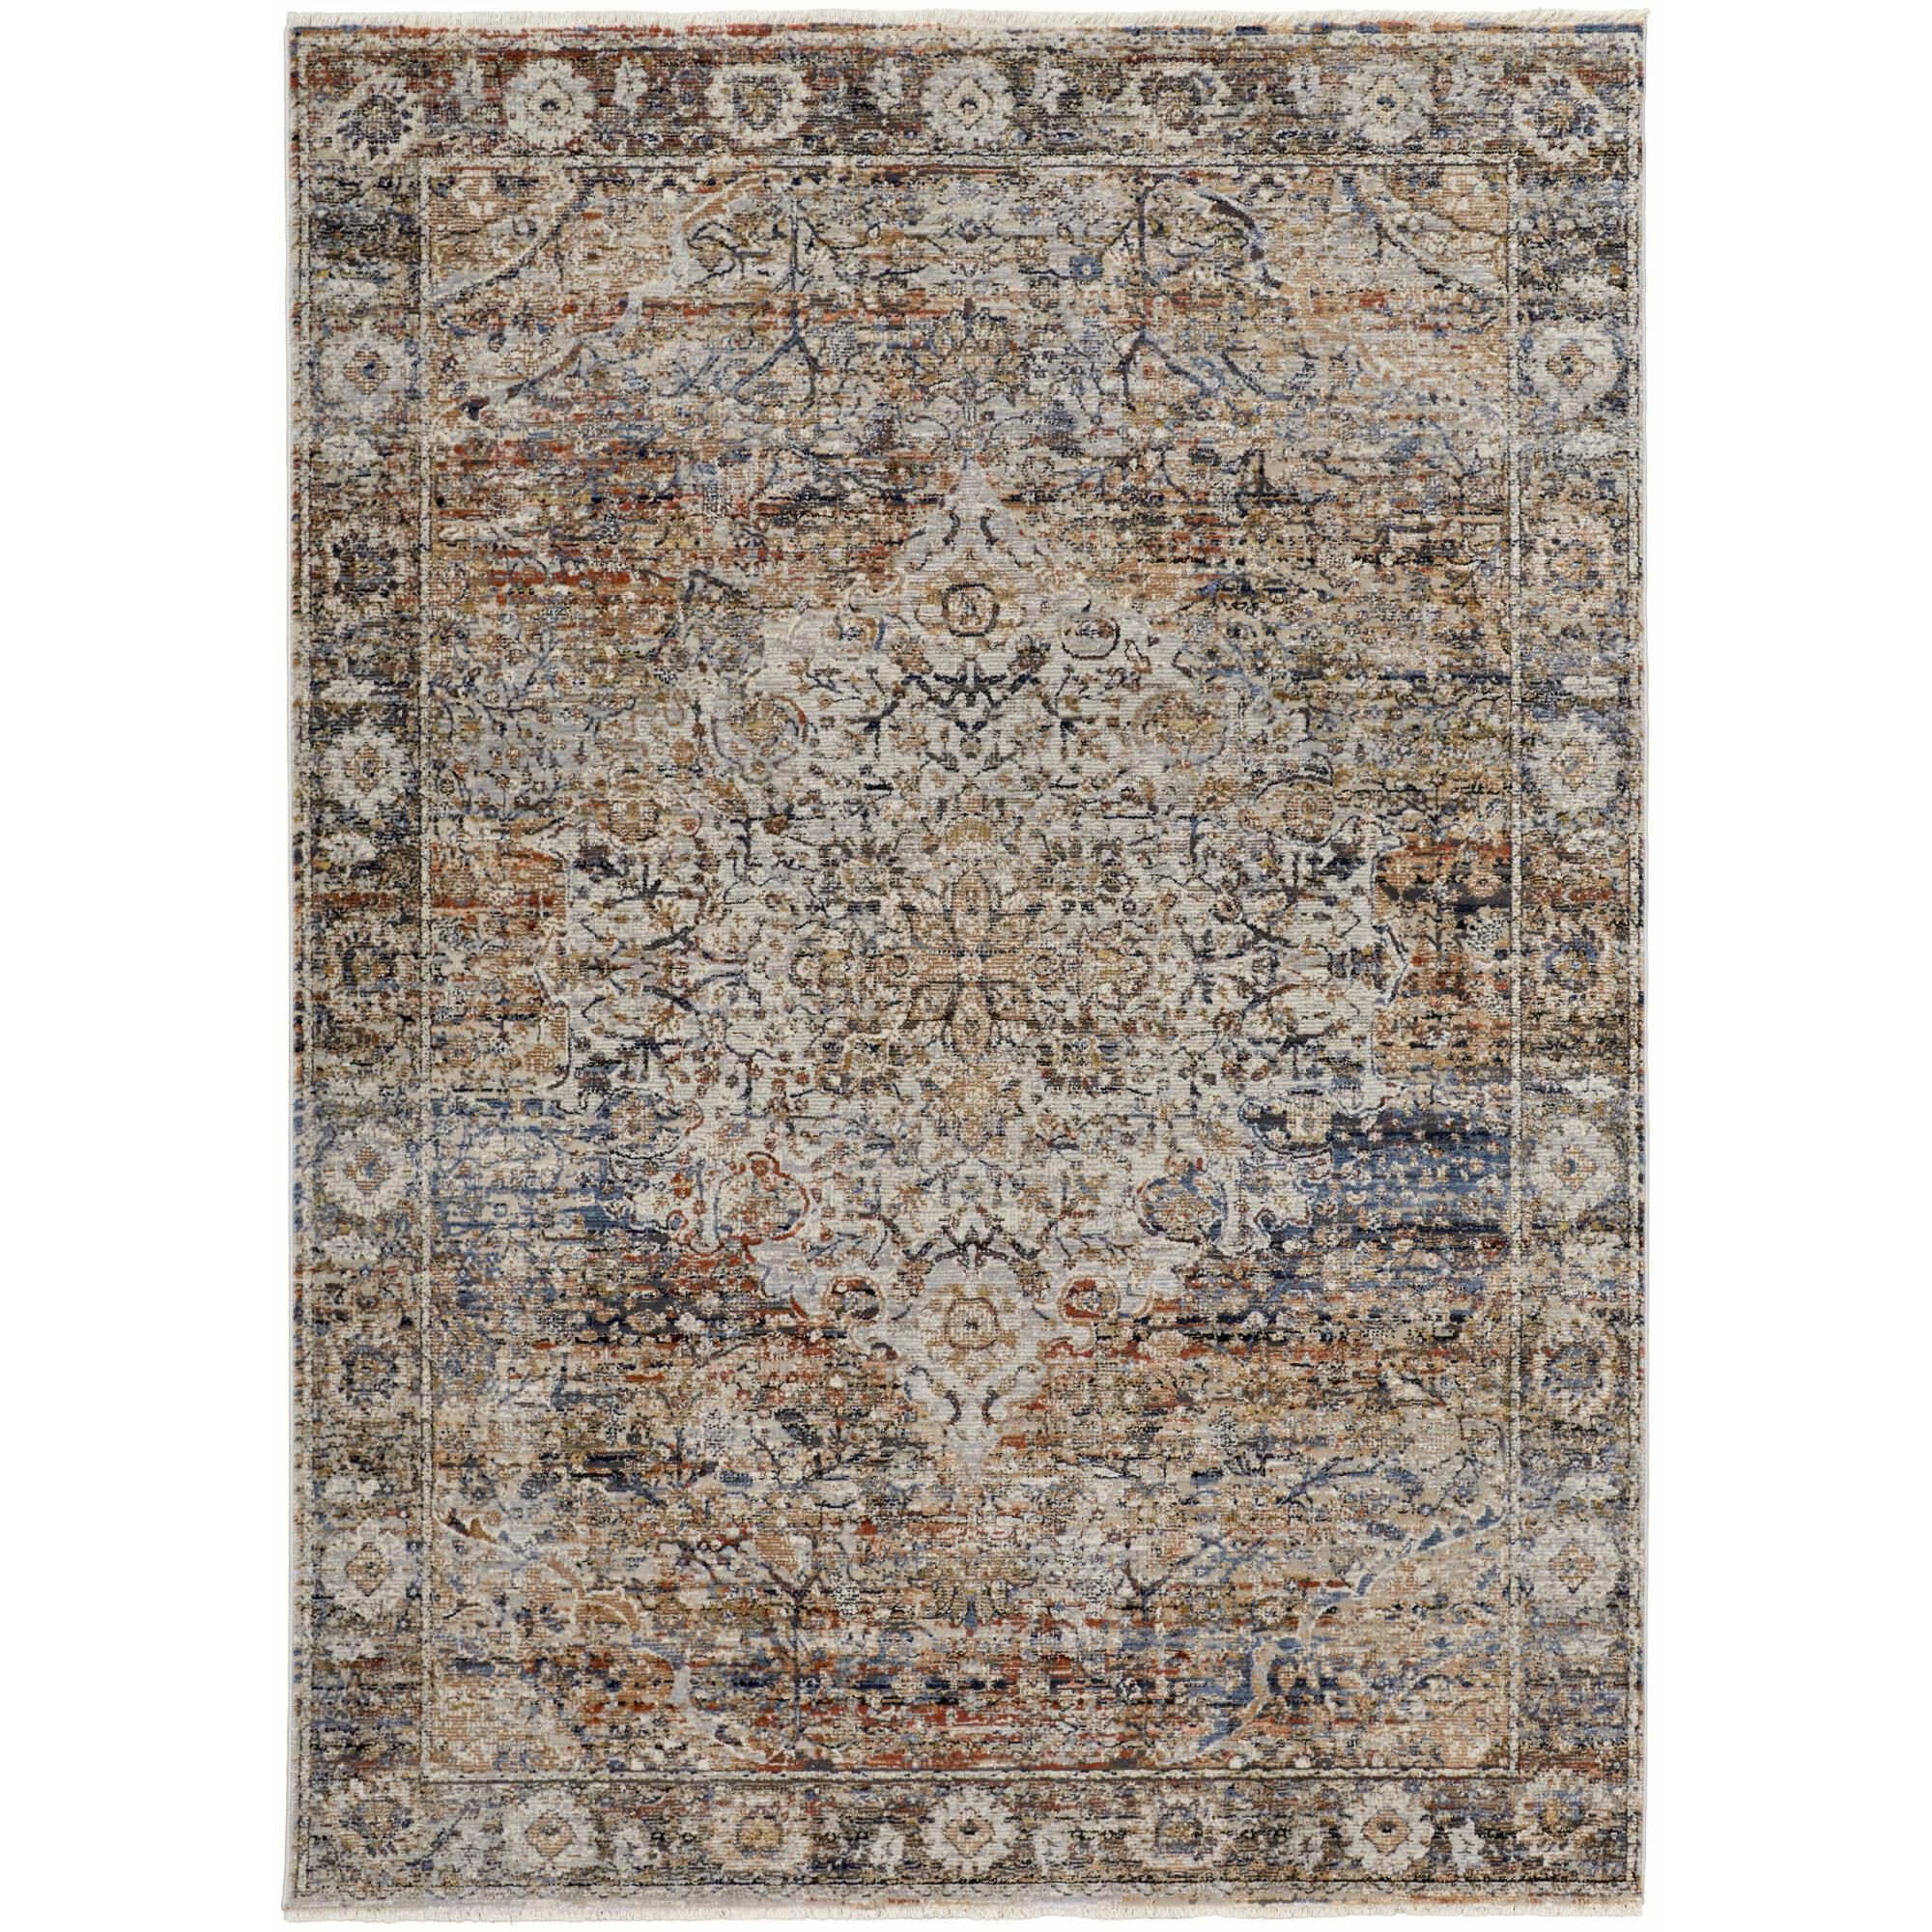 Kaia Area Rug by Feizy | 1800 Lighting